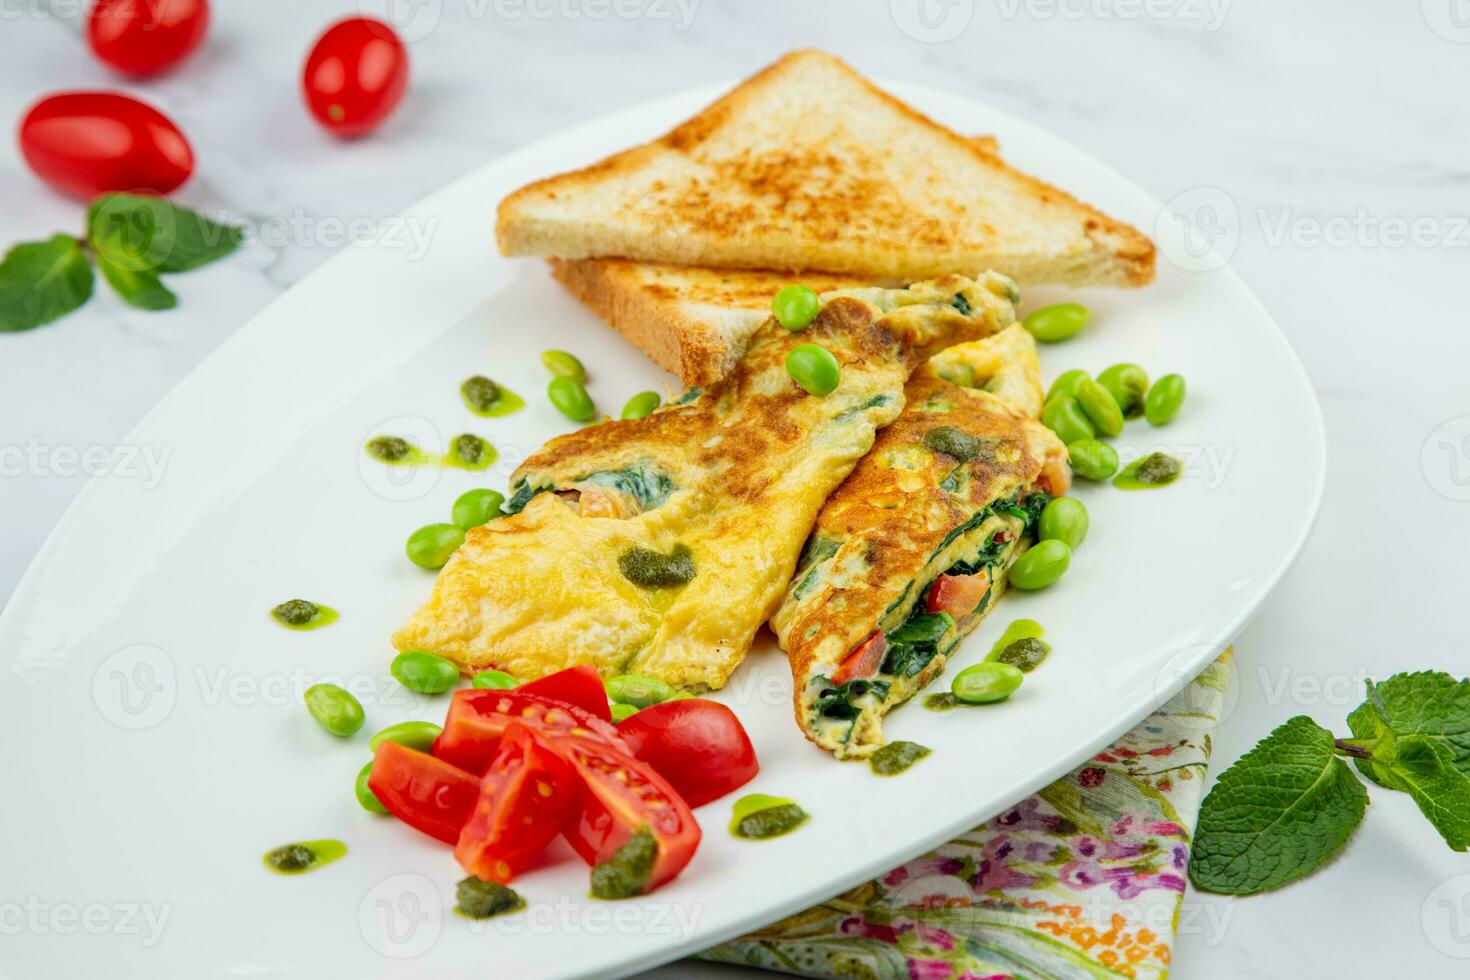 Breakfast of eggs and vegetables with cherry tomatoes and slices of bread in a white plate side view photo